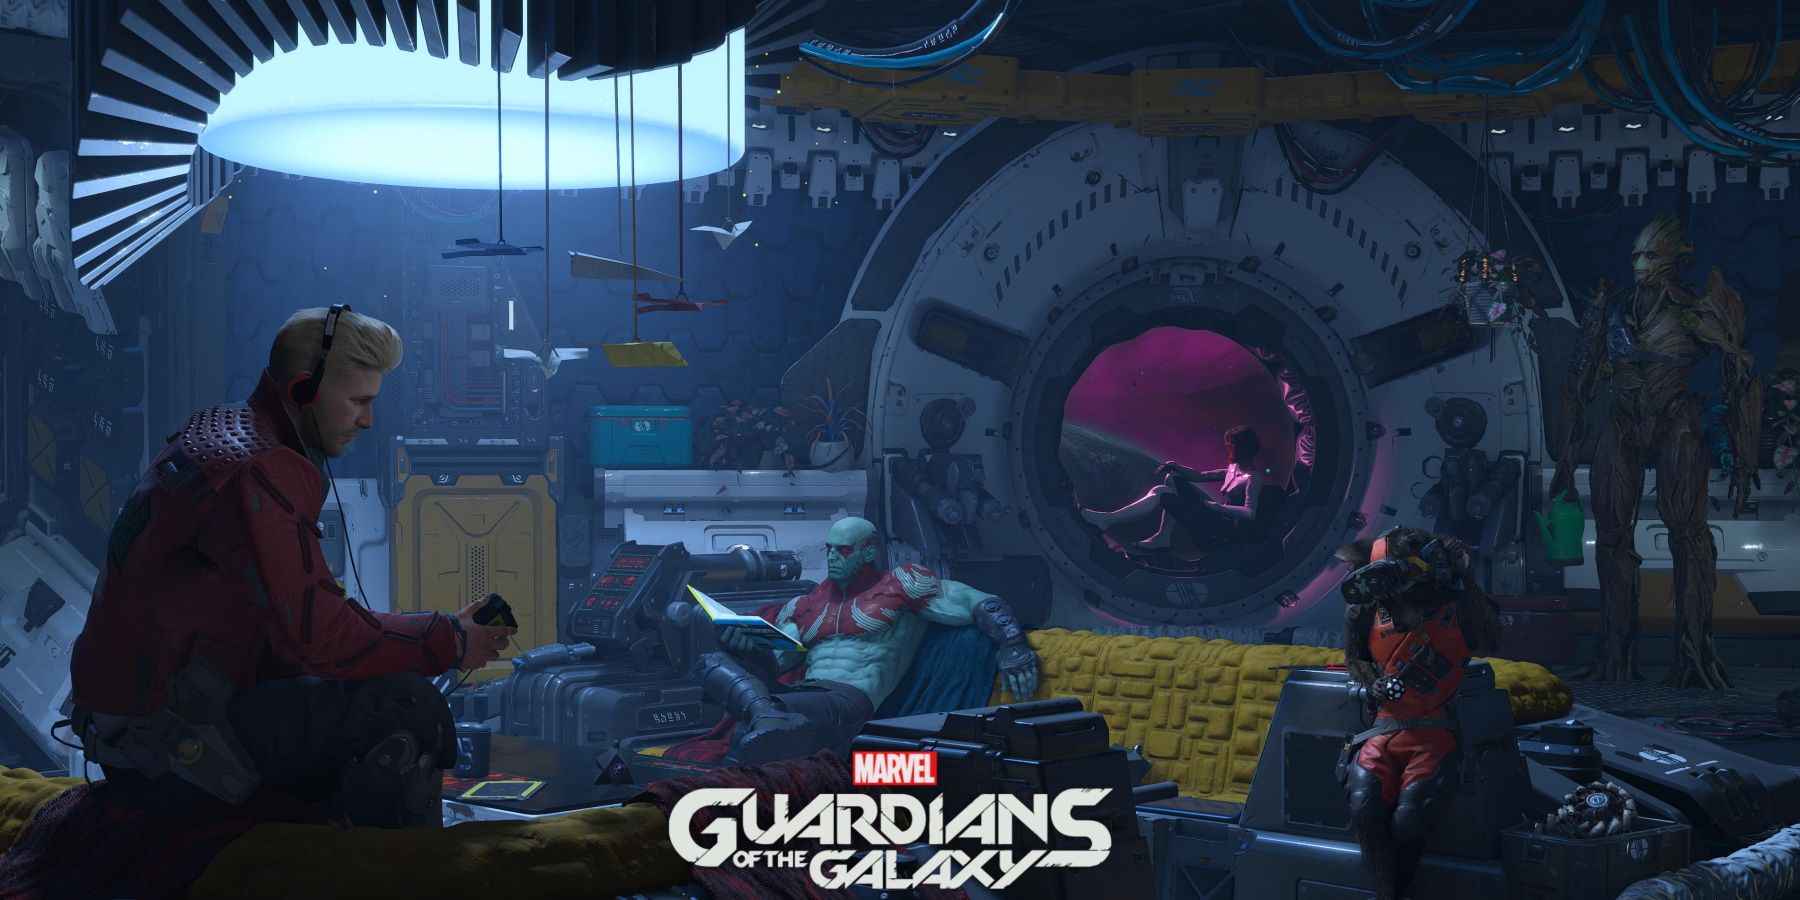 Marvel’s Guardians of The Galaxy start screen star-lord peter quill draz rocket groot gamora